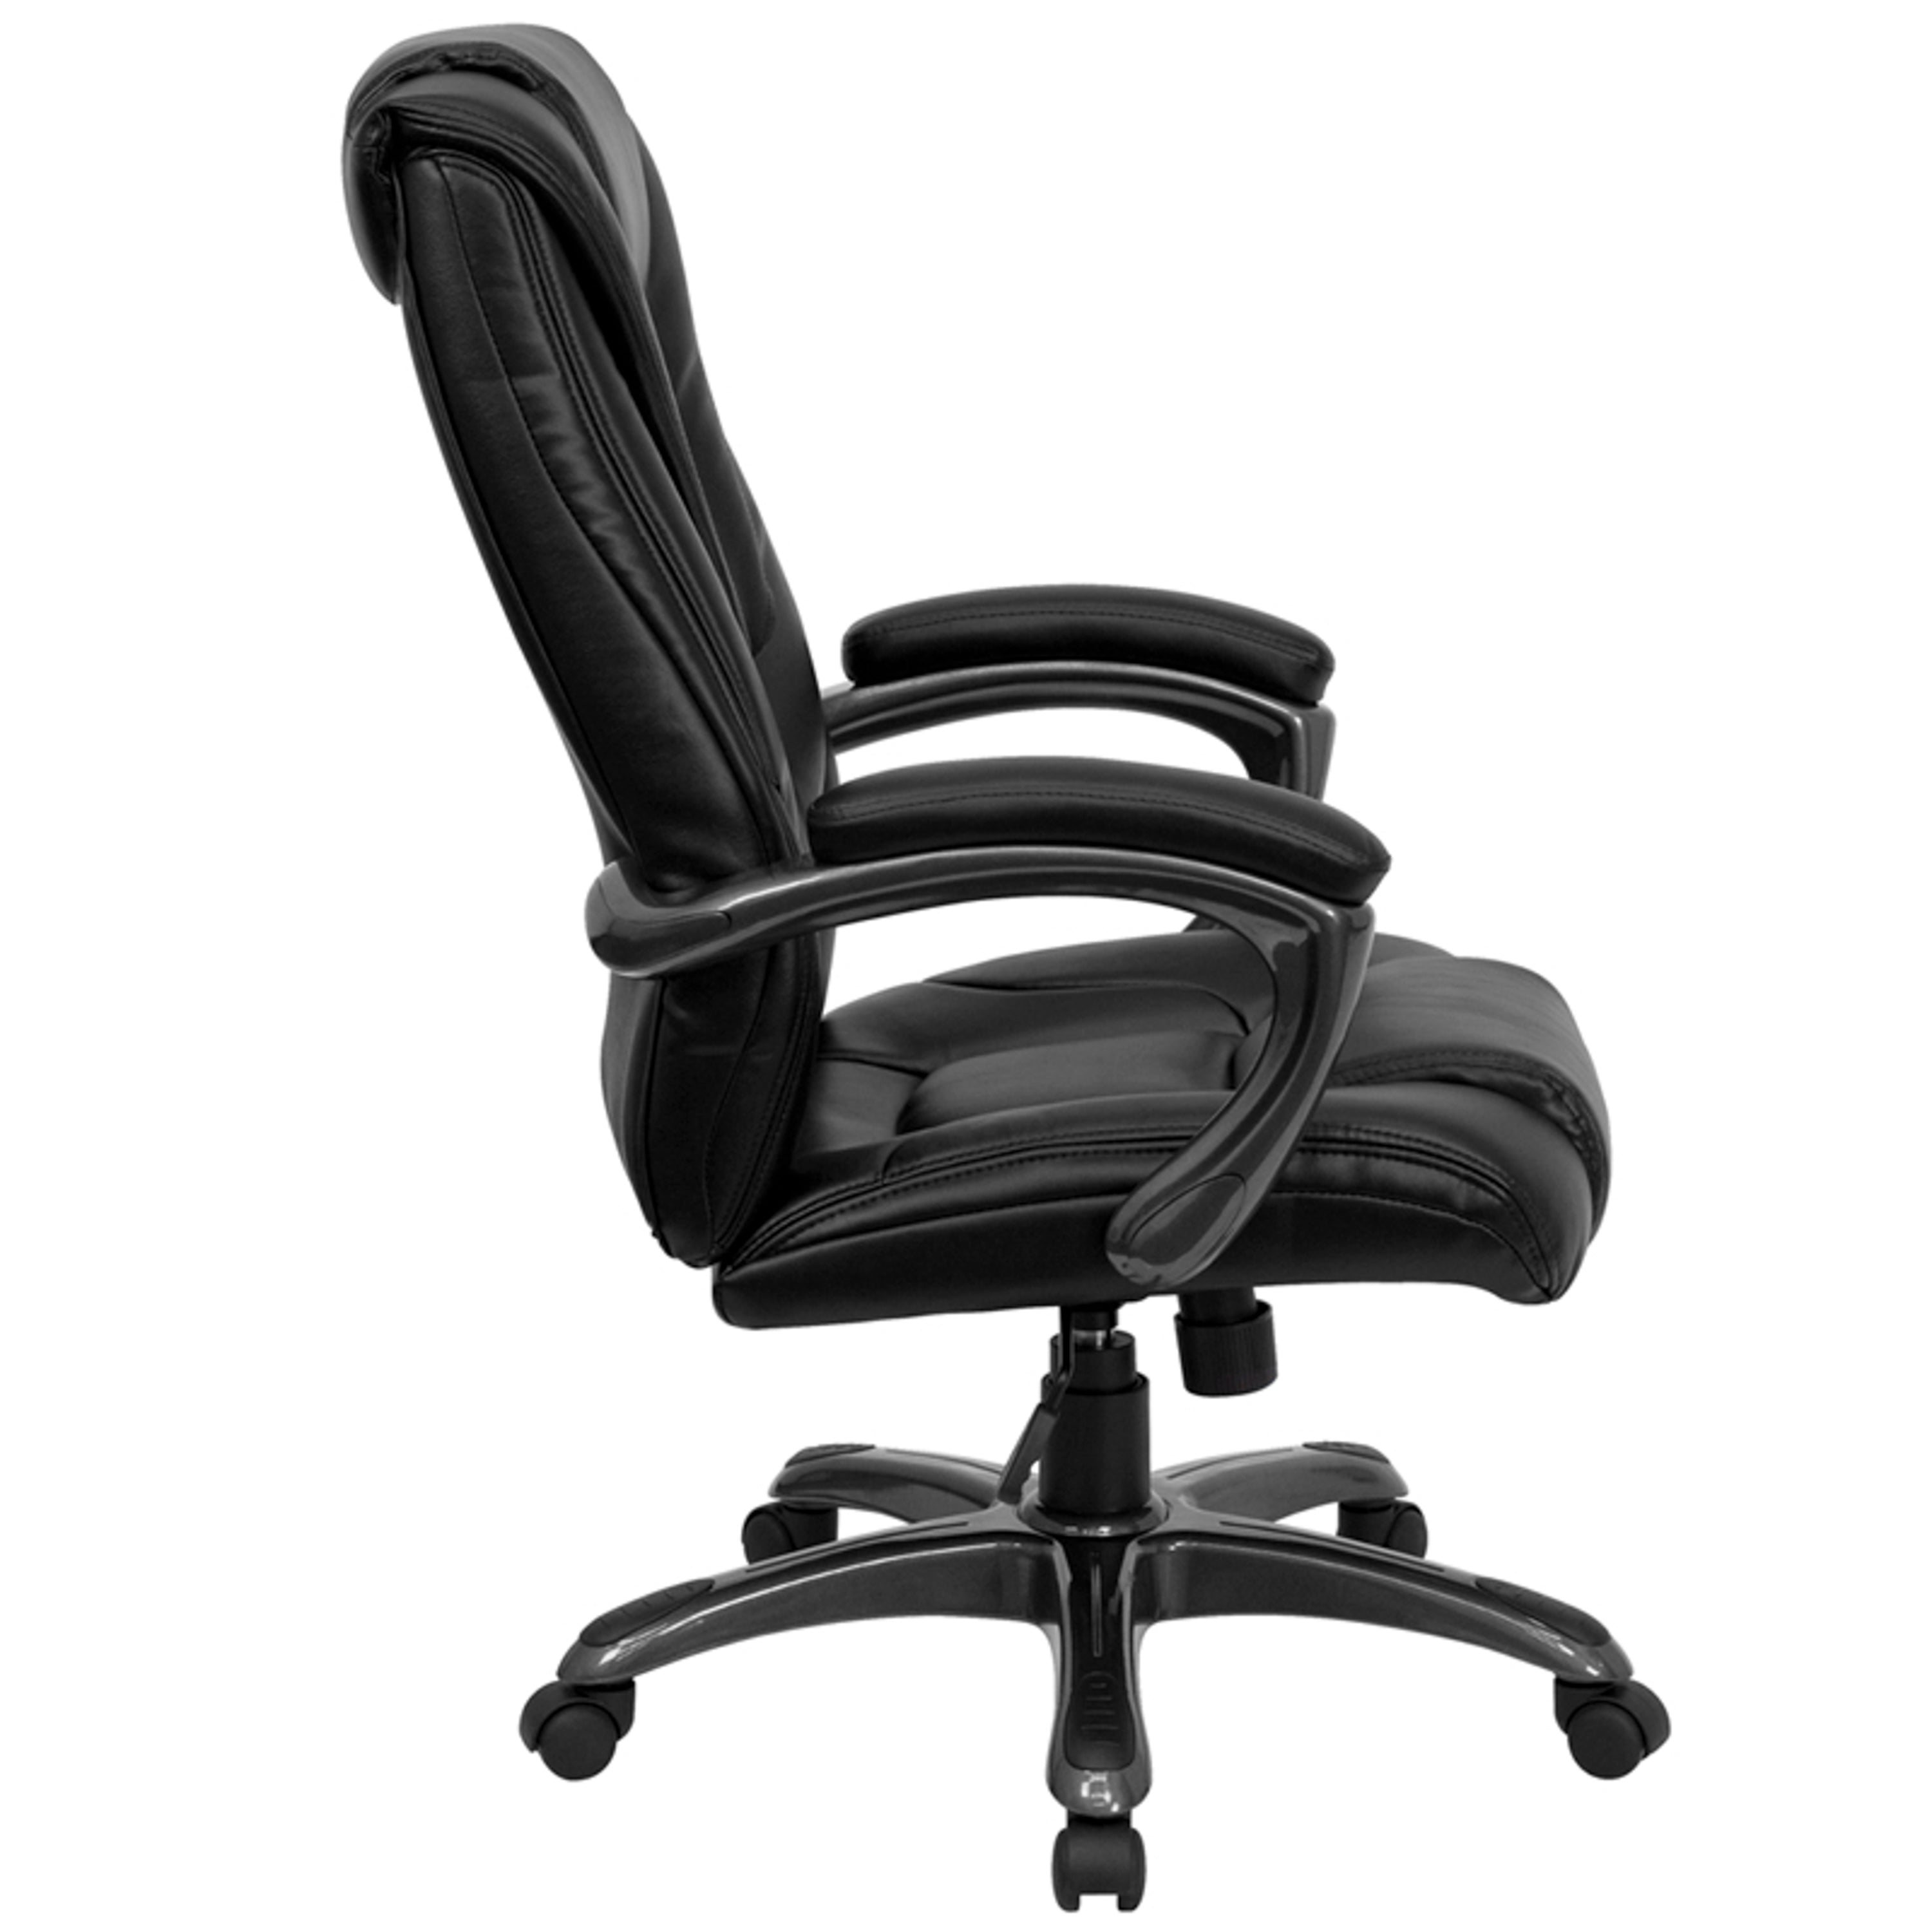 High Back LeatherSoft Layered Upholstered Executive Swivel Ergonomic Office Chair with Smoke Metal Base and Padded Arms-Office Chair-Flash Furniture-Wall2Wall Furnishings